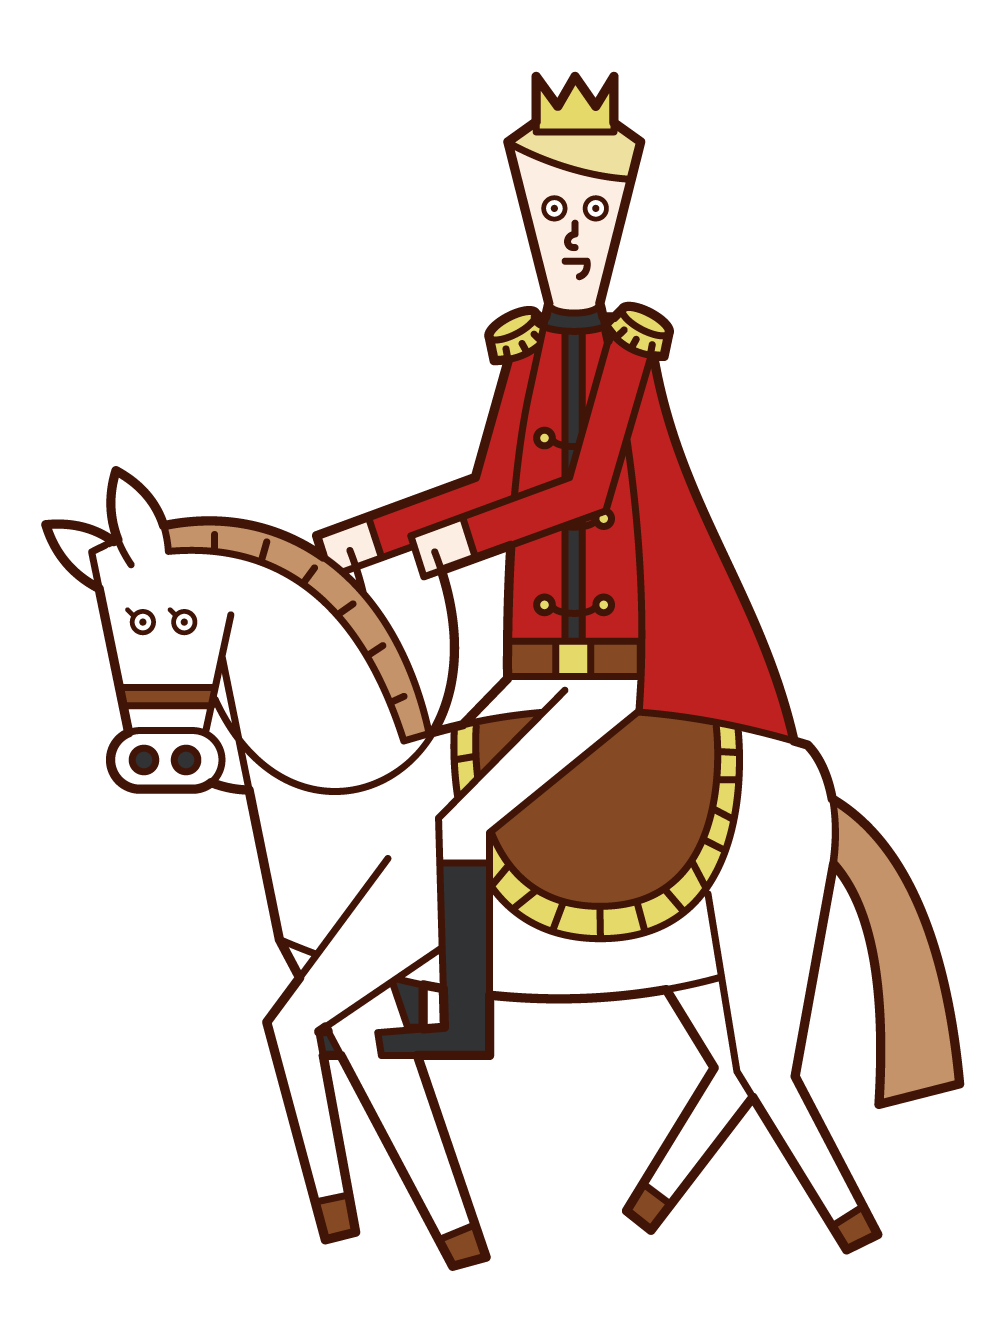 Illustration of a prince (male) on a white horse